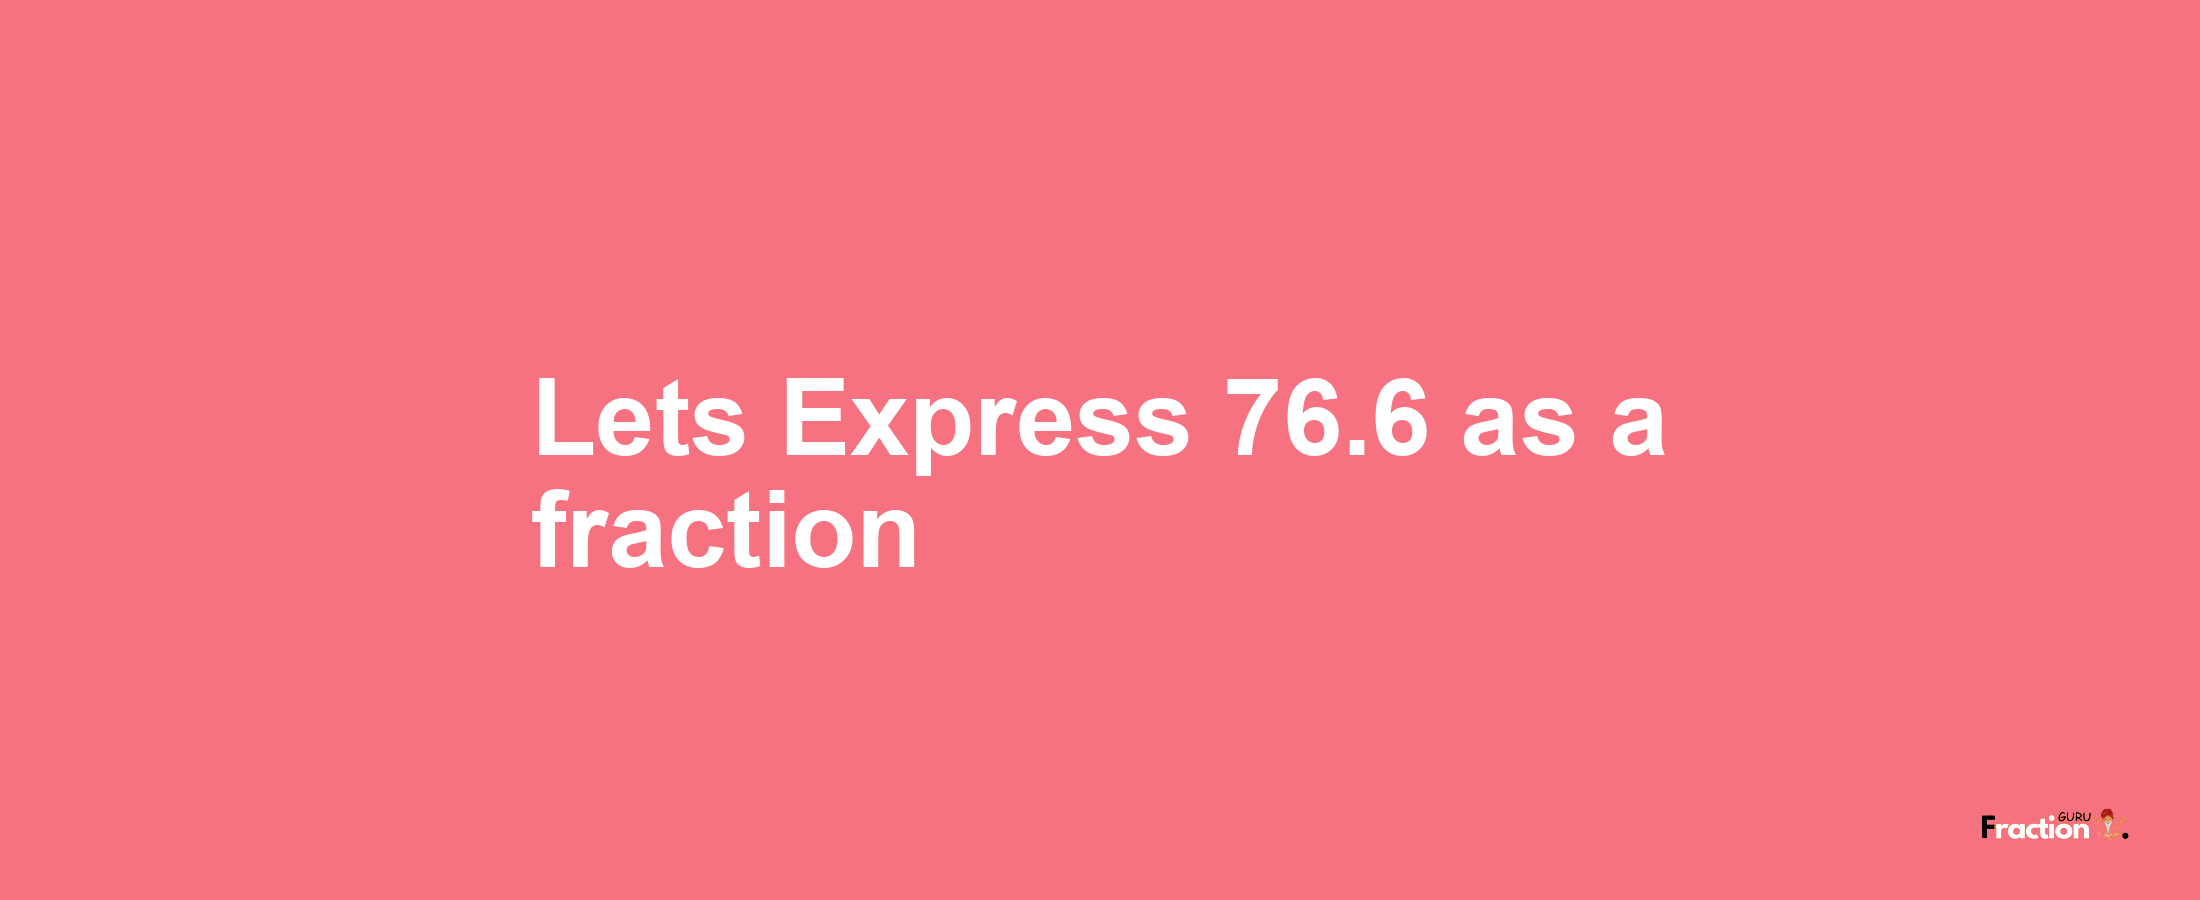 Lets Express 76.6 as afraction